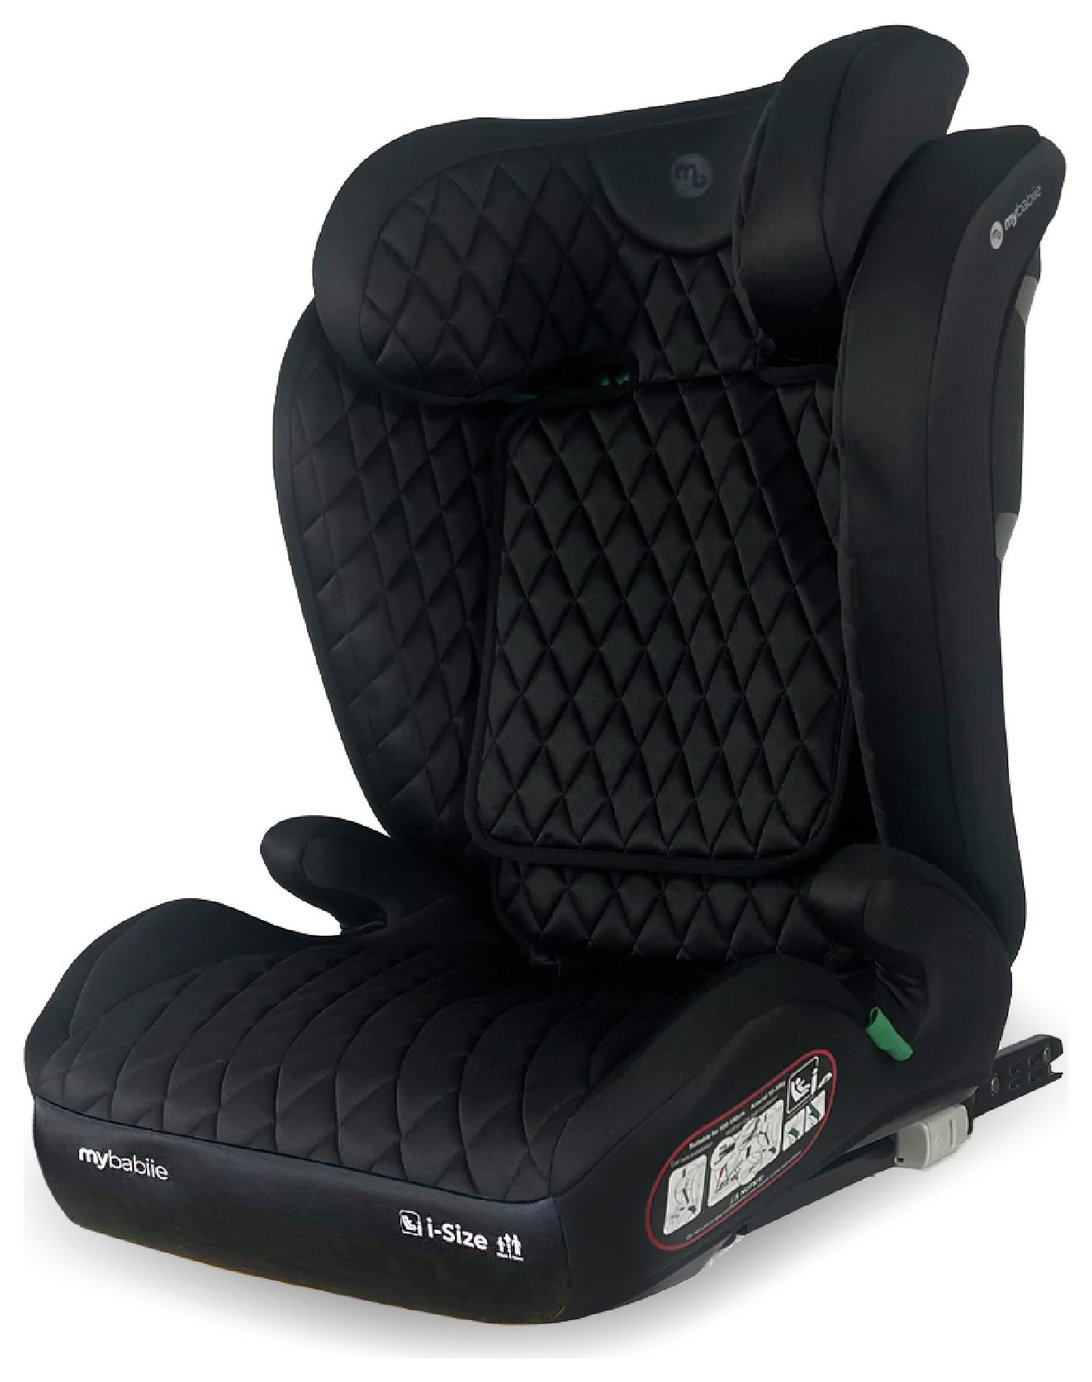 My Babiie Quilted Black Car Seat